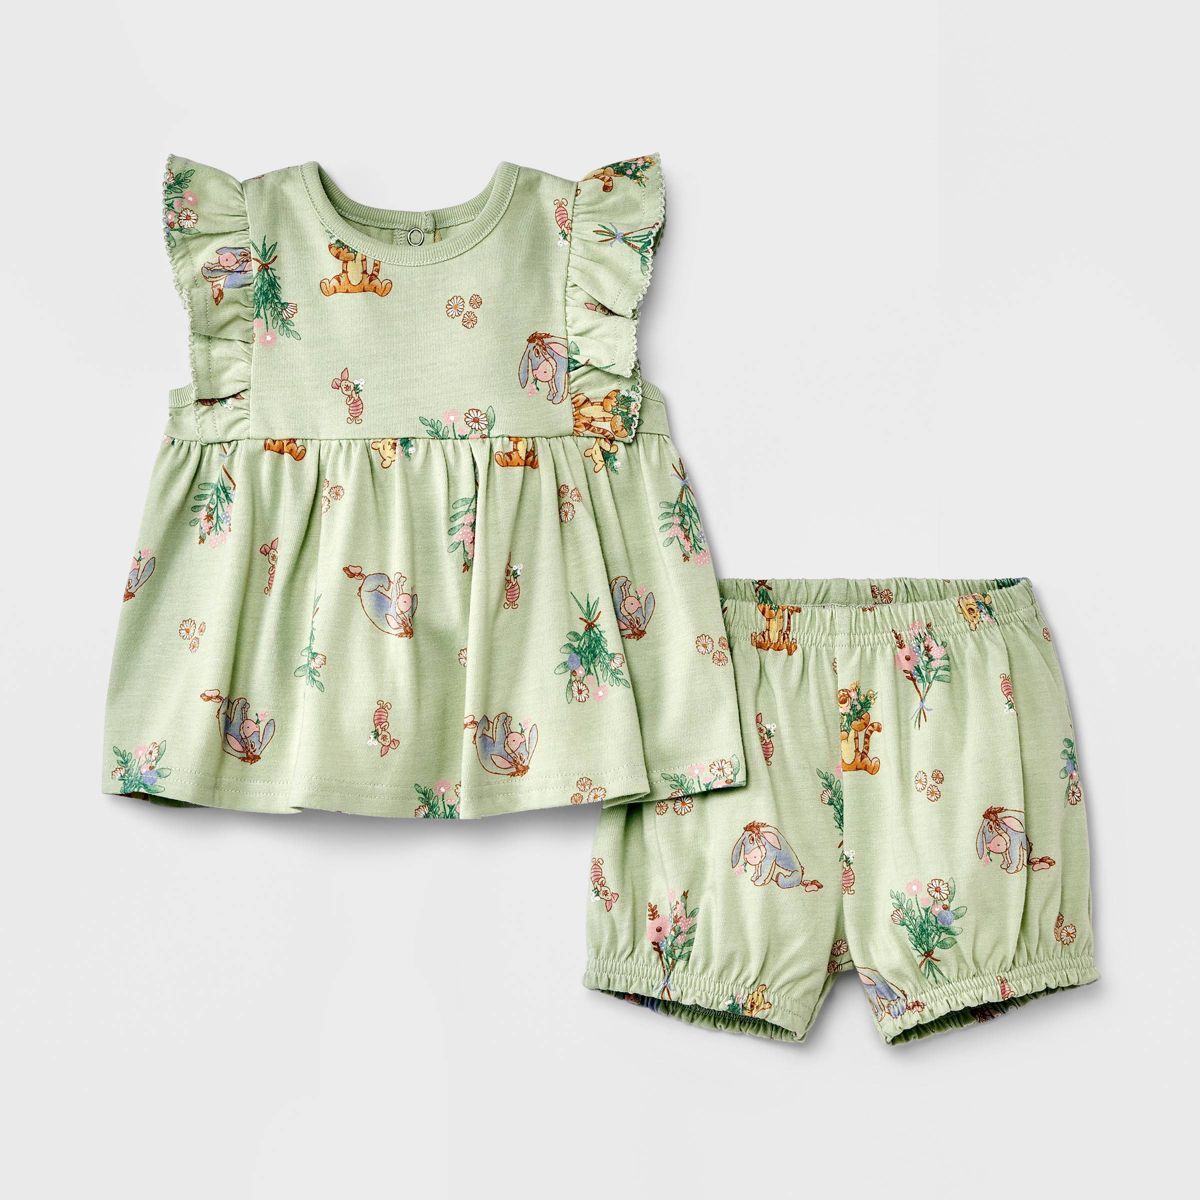 Baby Girls' Winnie the Pooh Top and Bottom Set - Green | Target